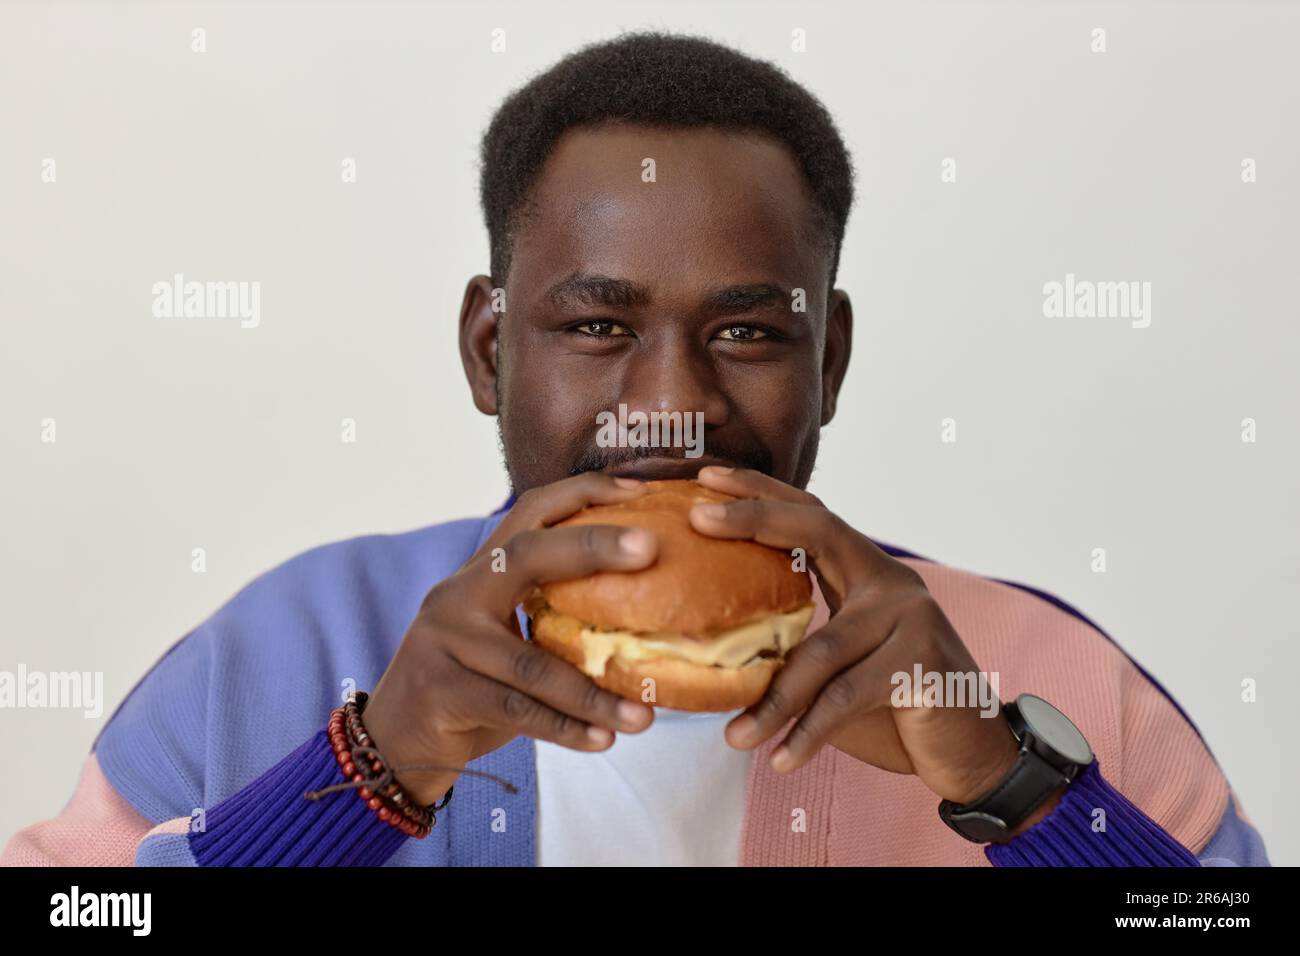 Front view portrait of young black man eating takeout burger and looking at camera against white Stock Photo